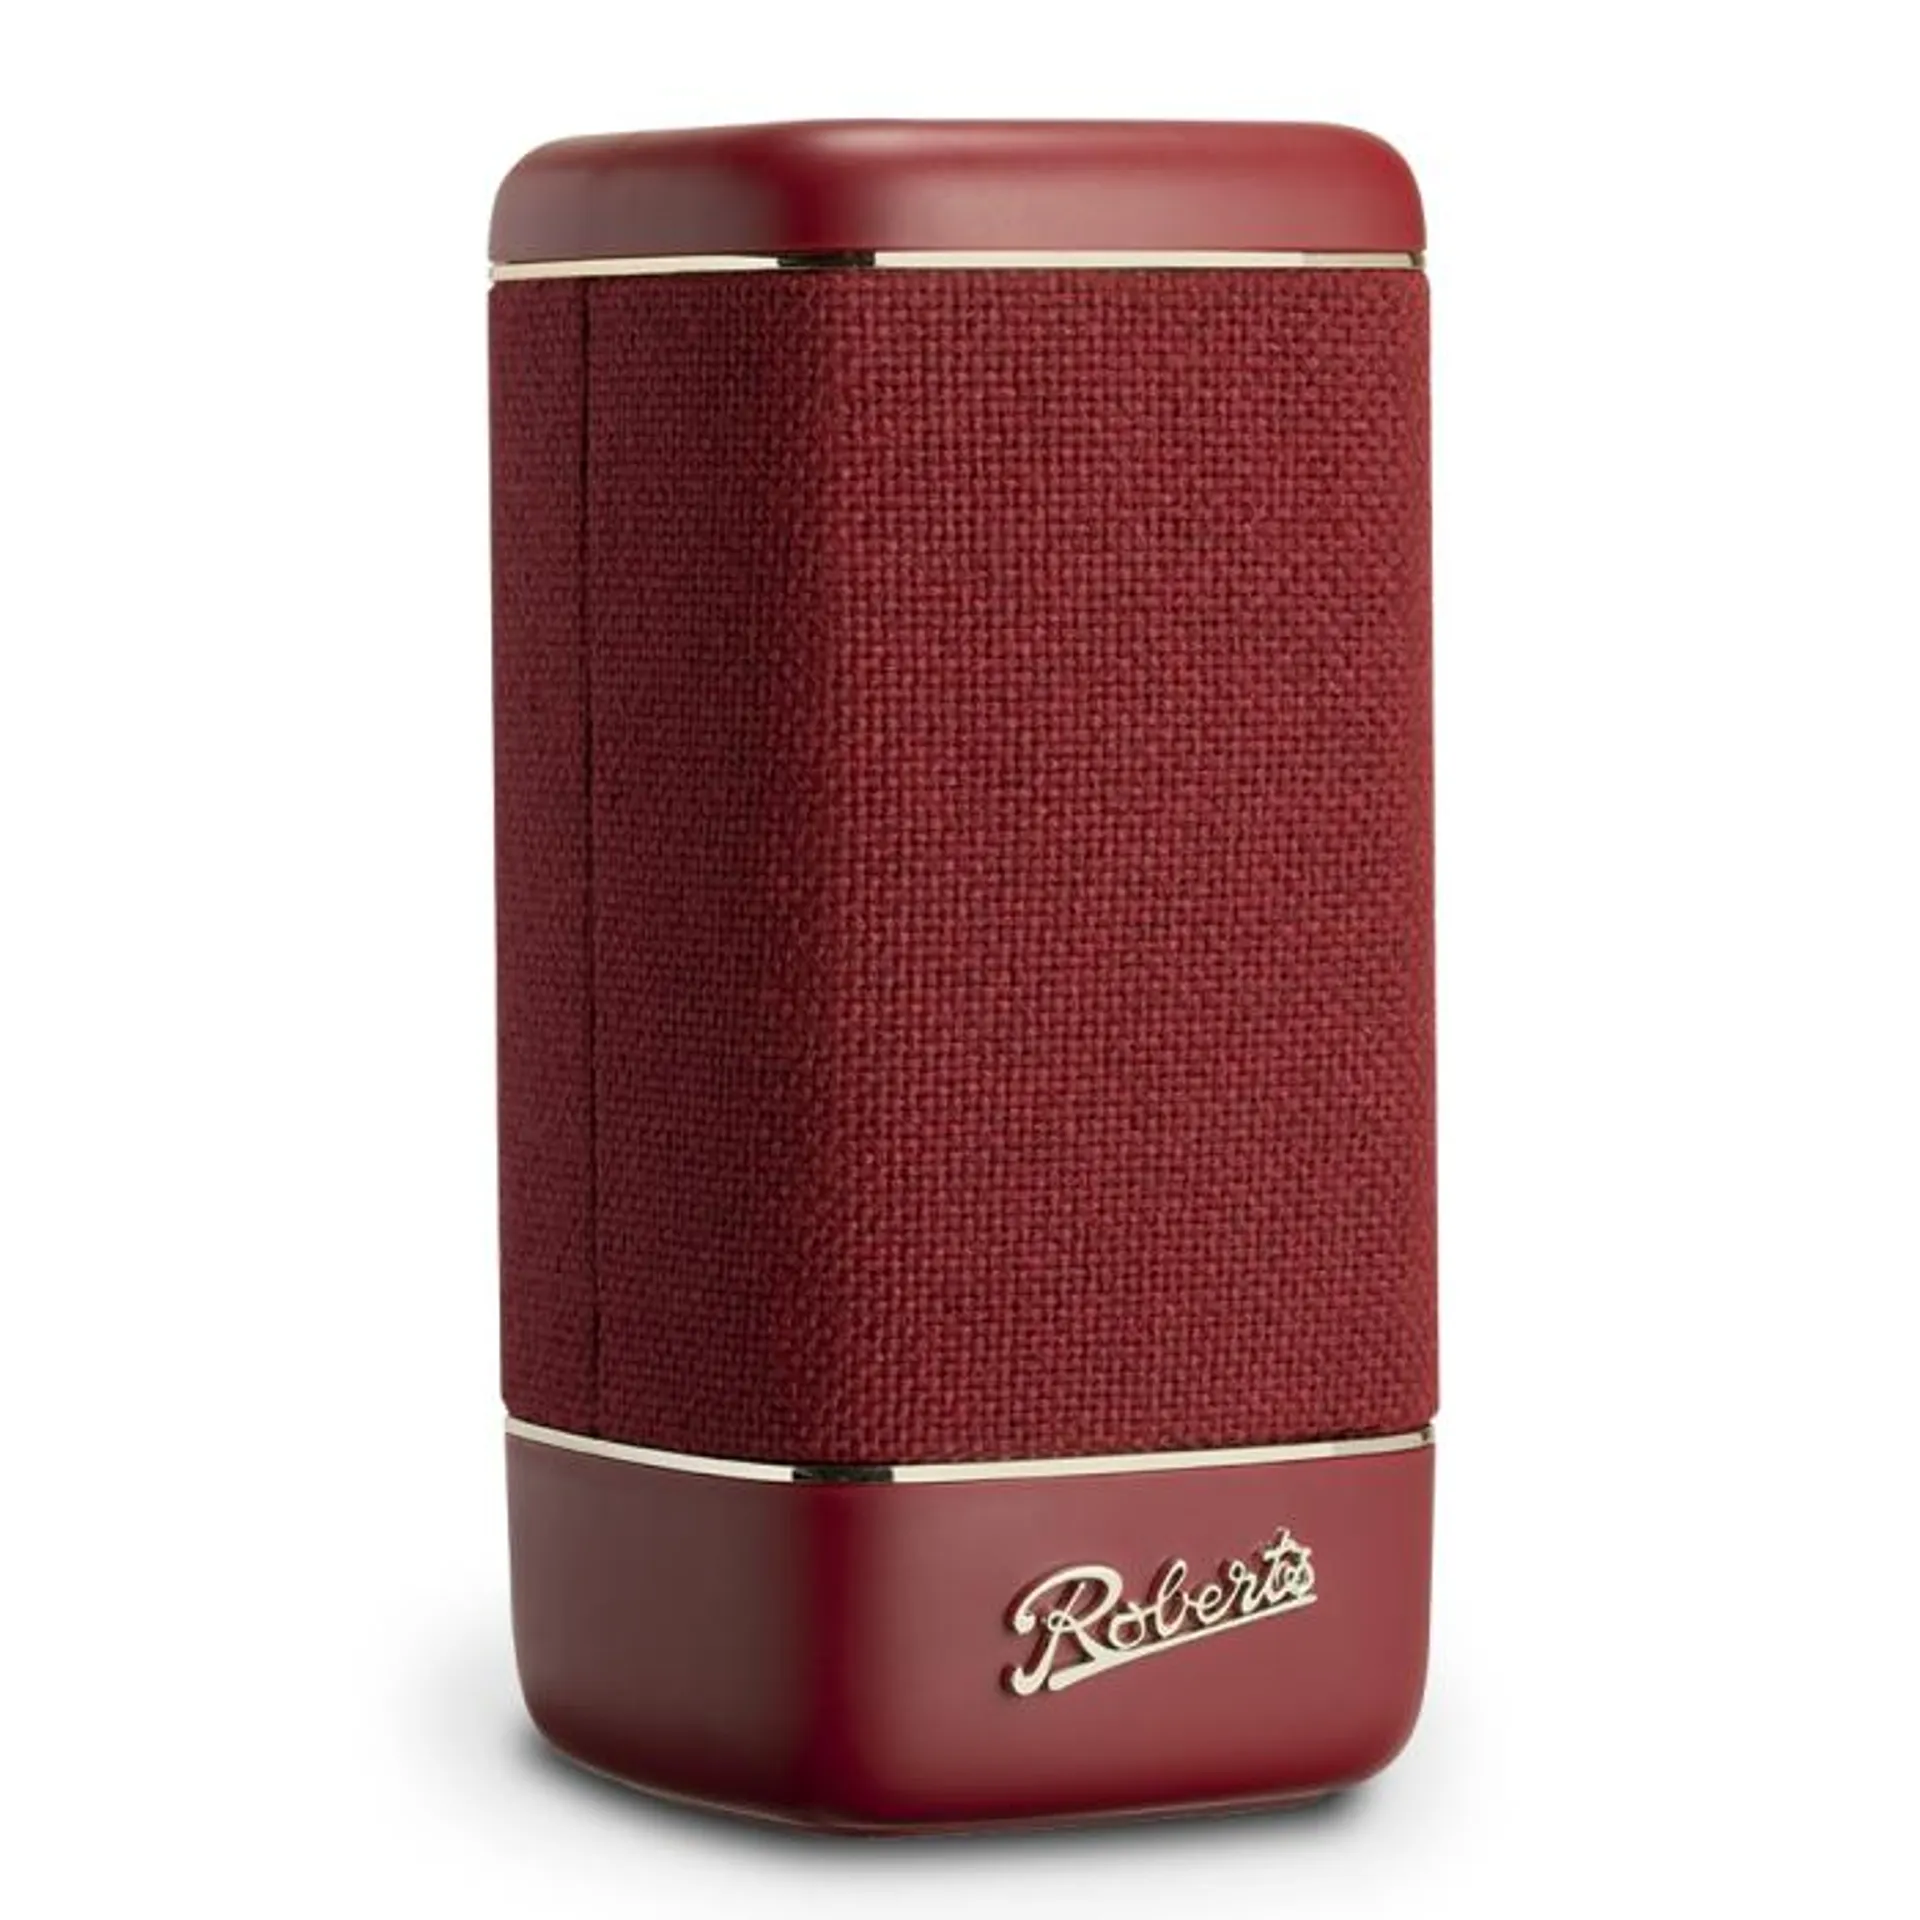 Roberts 330BR, Beacon 330, Portable Bluetooth Speaker, Berry Red